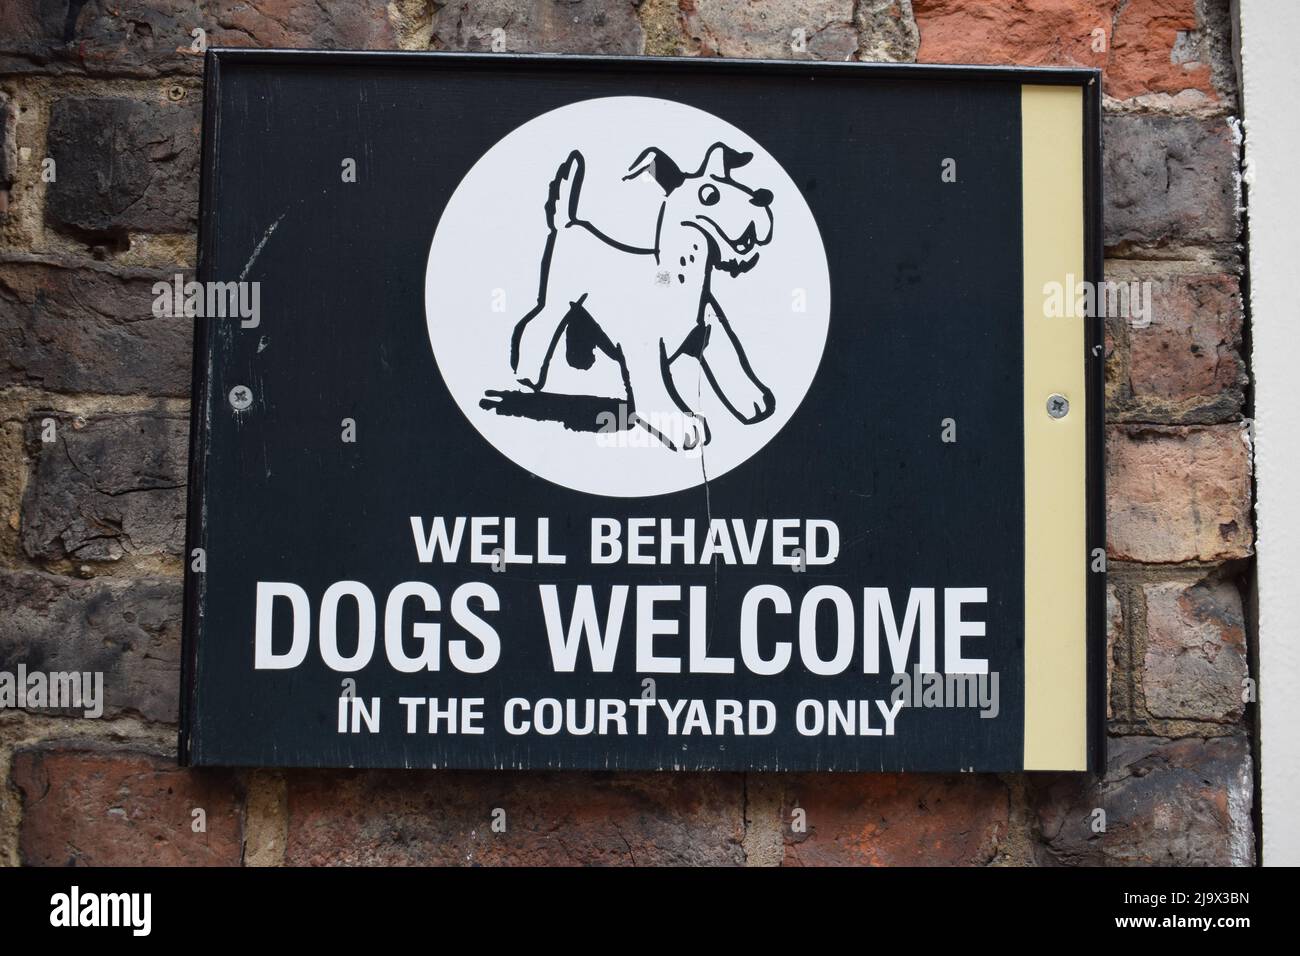 dogs welcome sign uk Stock Photo